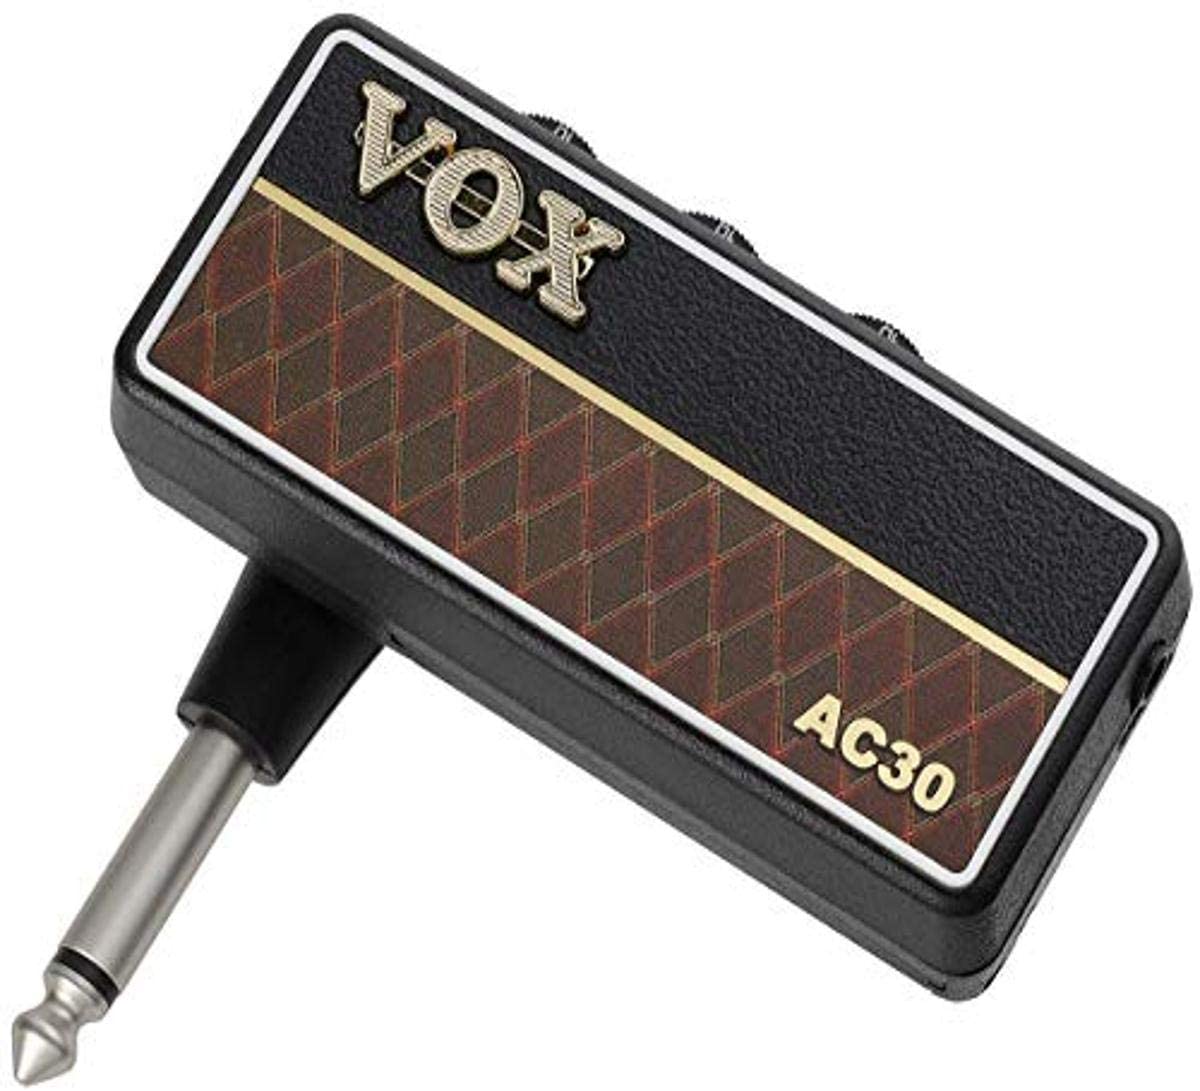 Vox amPlug 2 AC30 Headphone Guitar Amp <br/> Headphone Guitar Amplifier with 3 Amp Modes, 9 Selectable Effects, Tremolo Circuit, Speaker Cabinet Emulation, and Aux In Jack